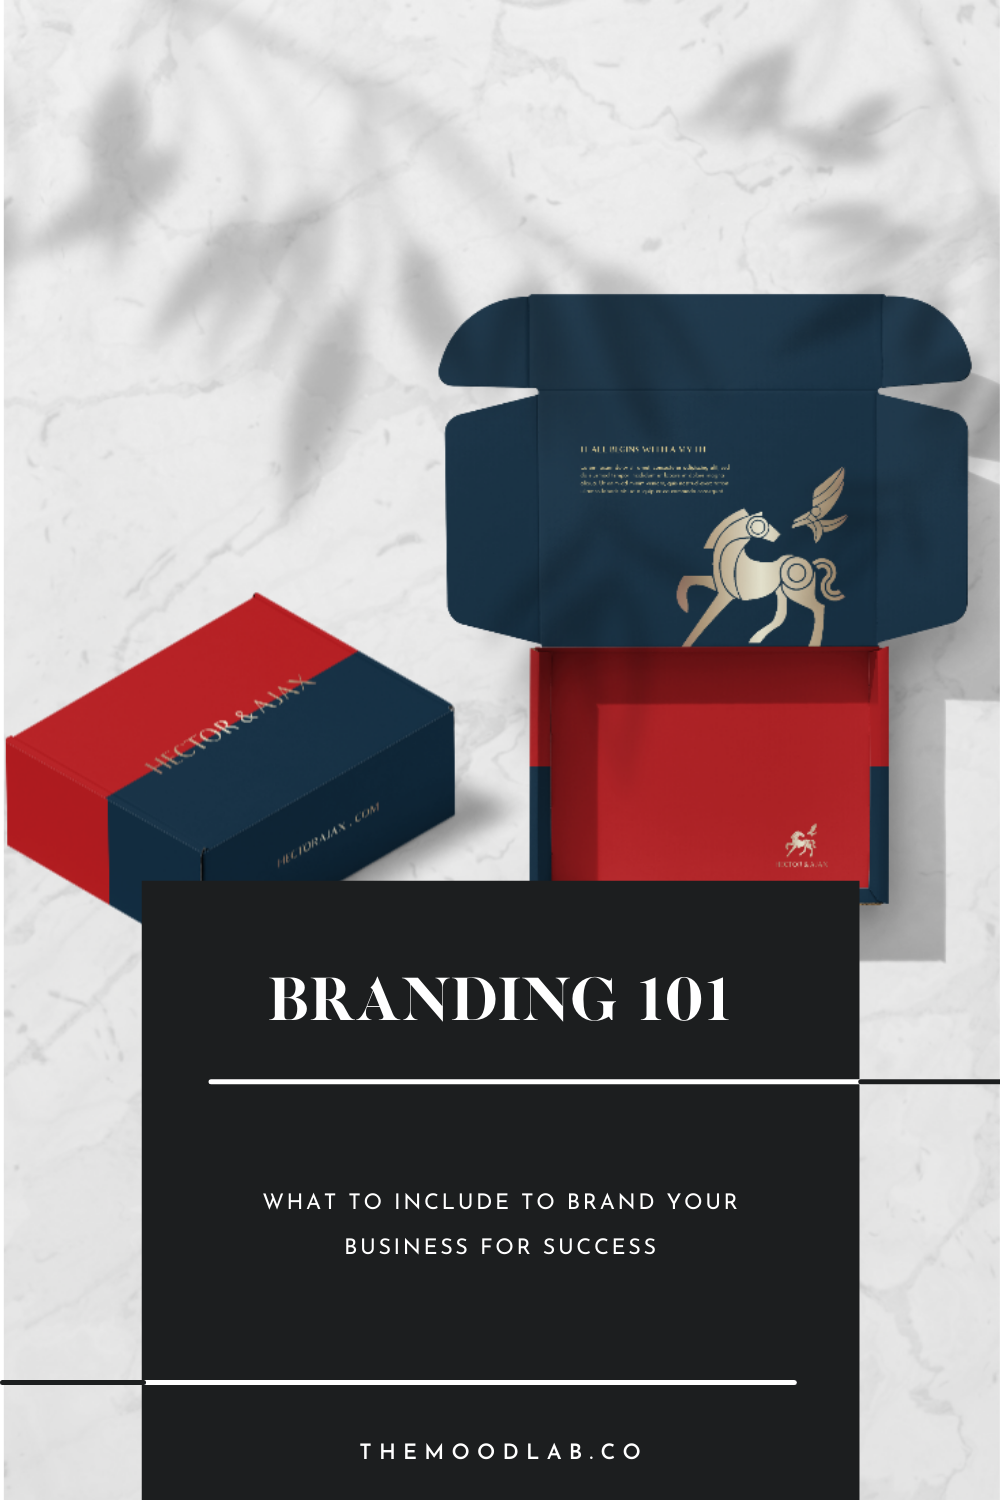 Branding your business for success!